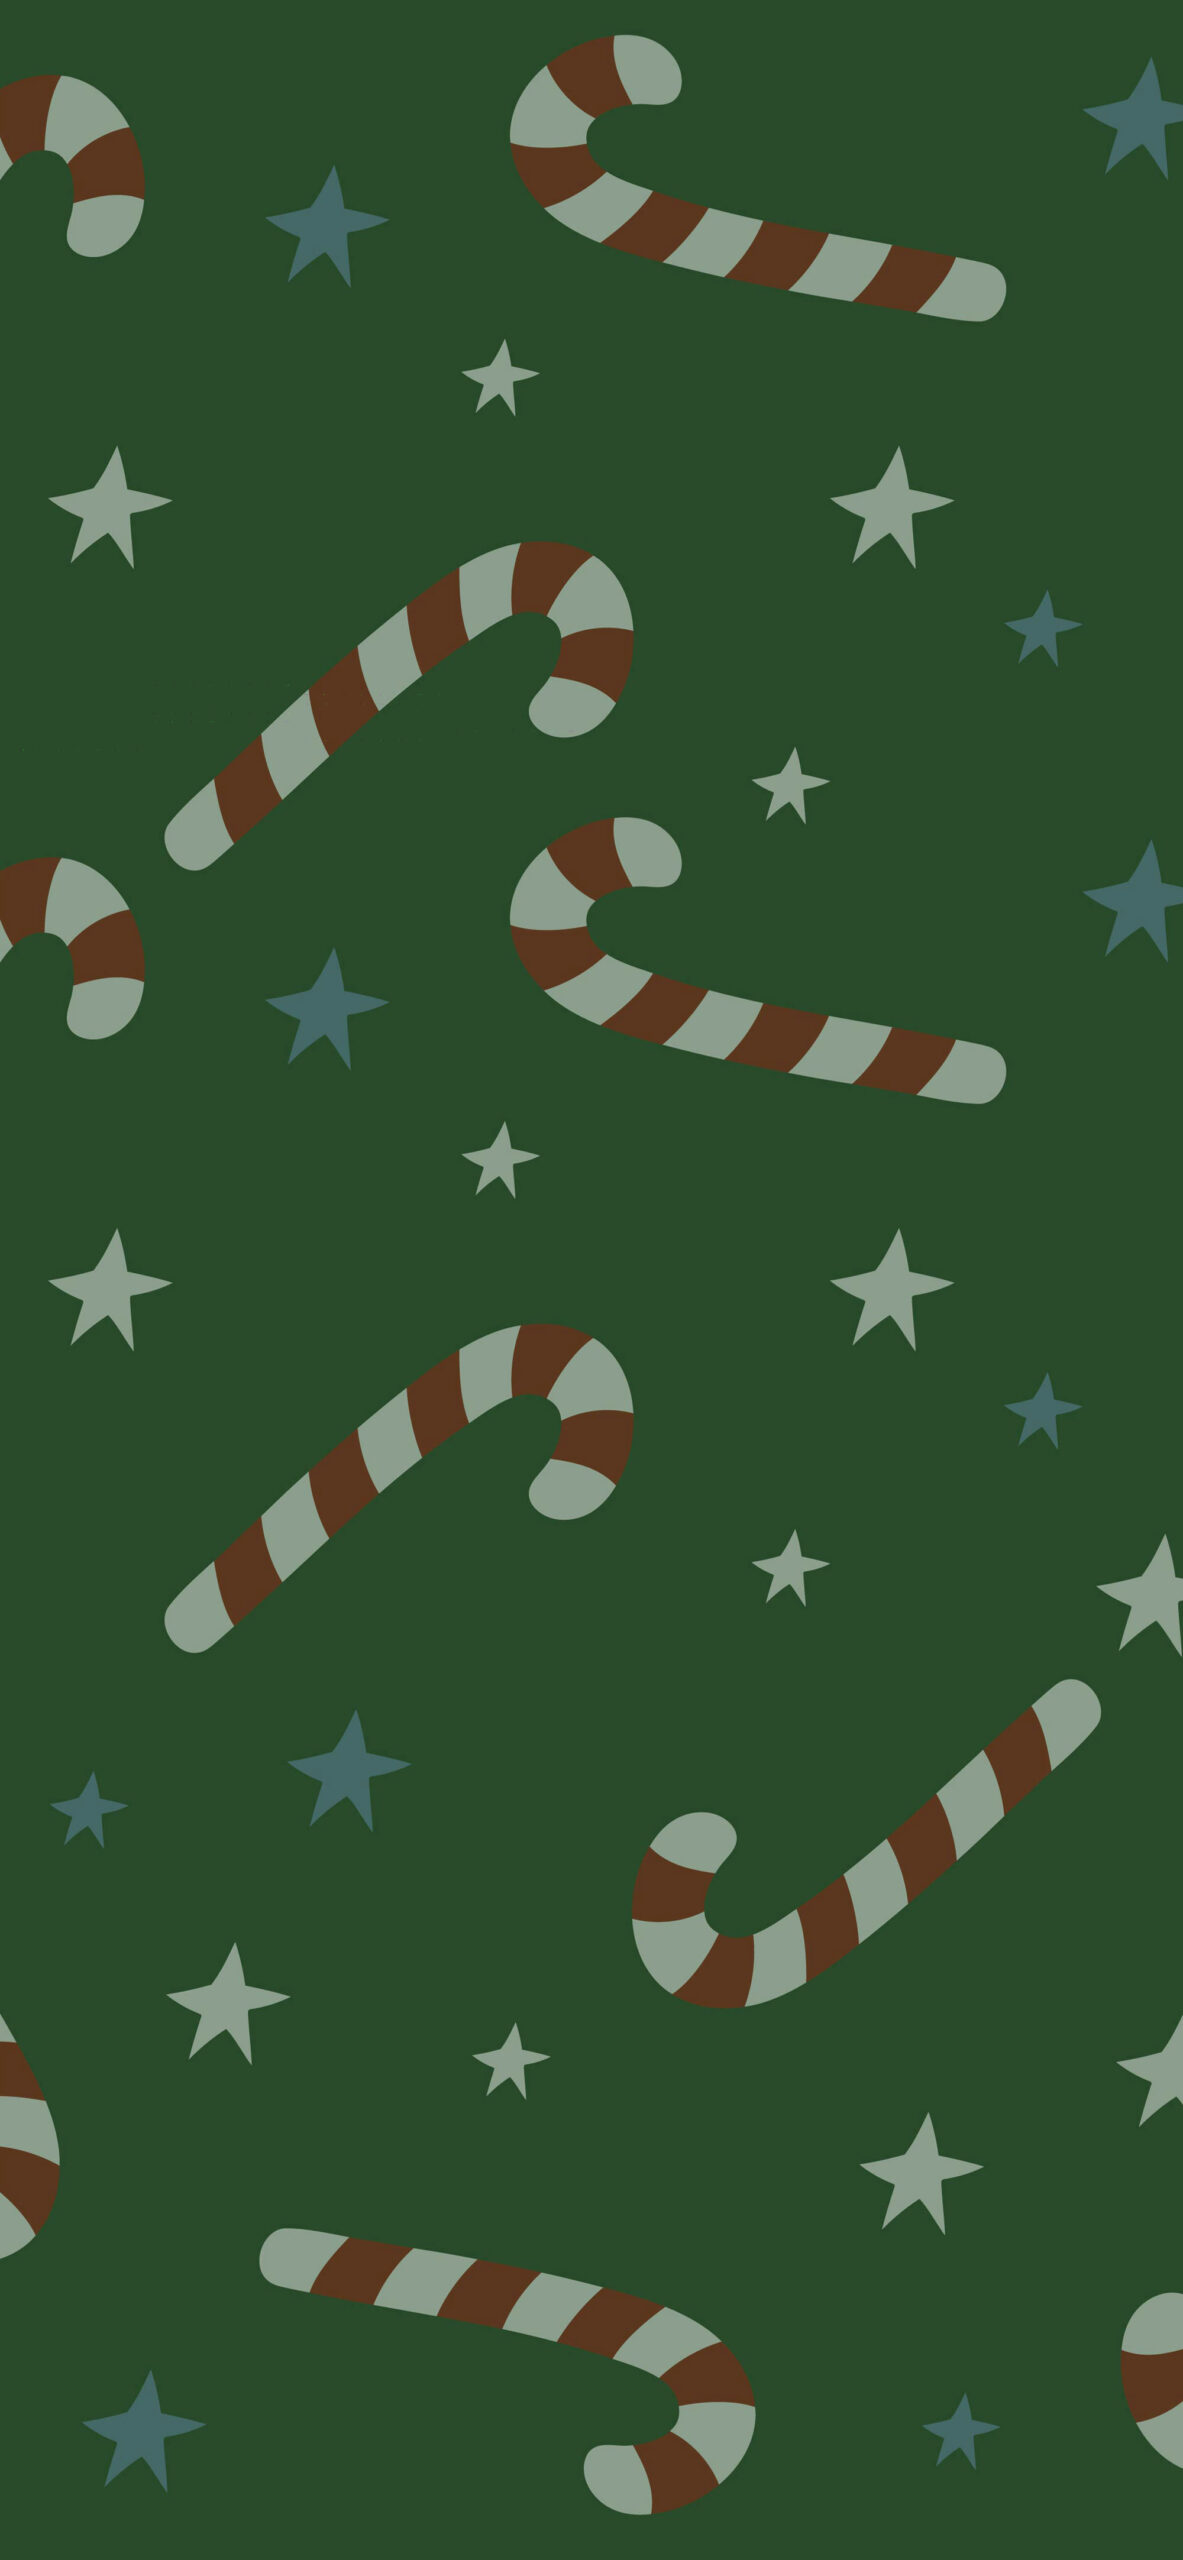 merry christmas green background